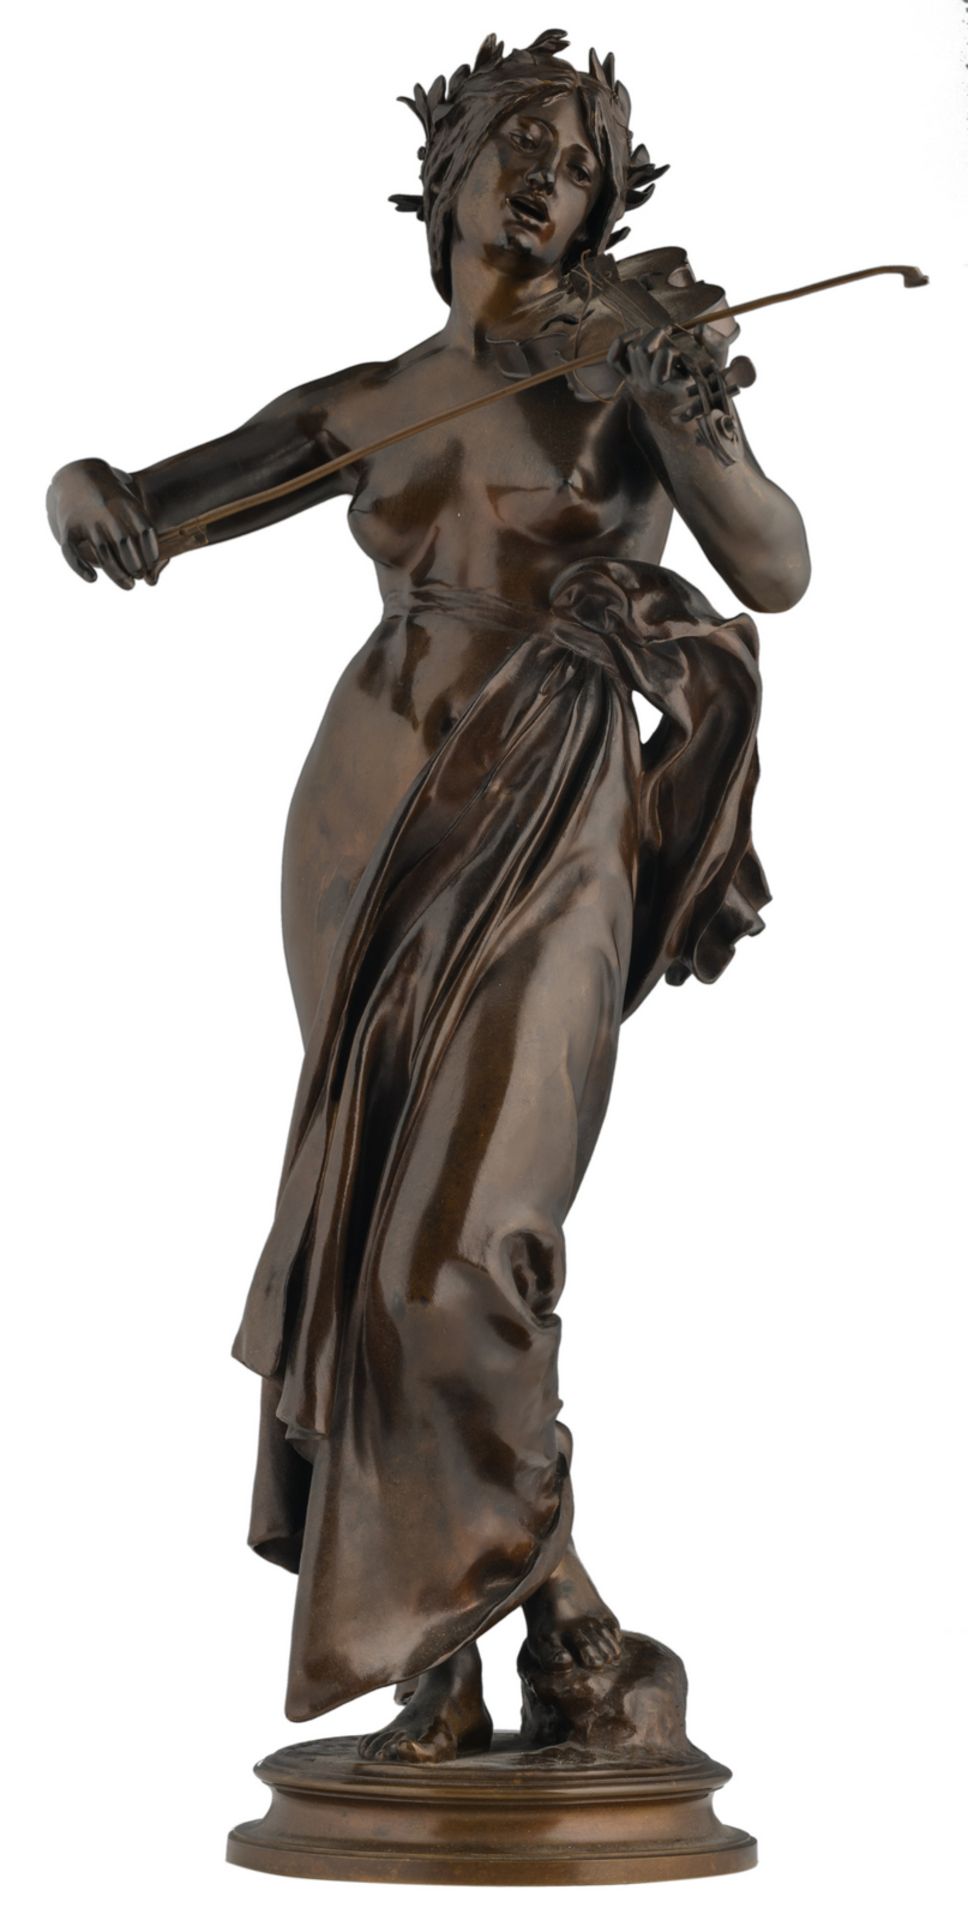 Delaplanche E., a violinist, patinated bronze, marked 'F. Barbedienne fondeur' and 'Réduction